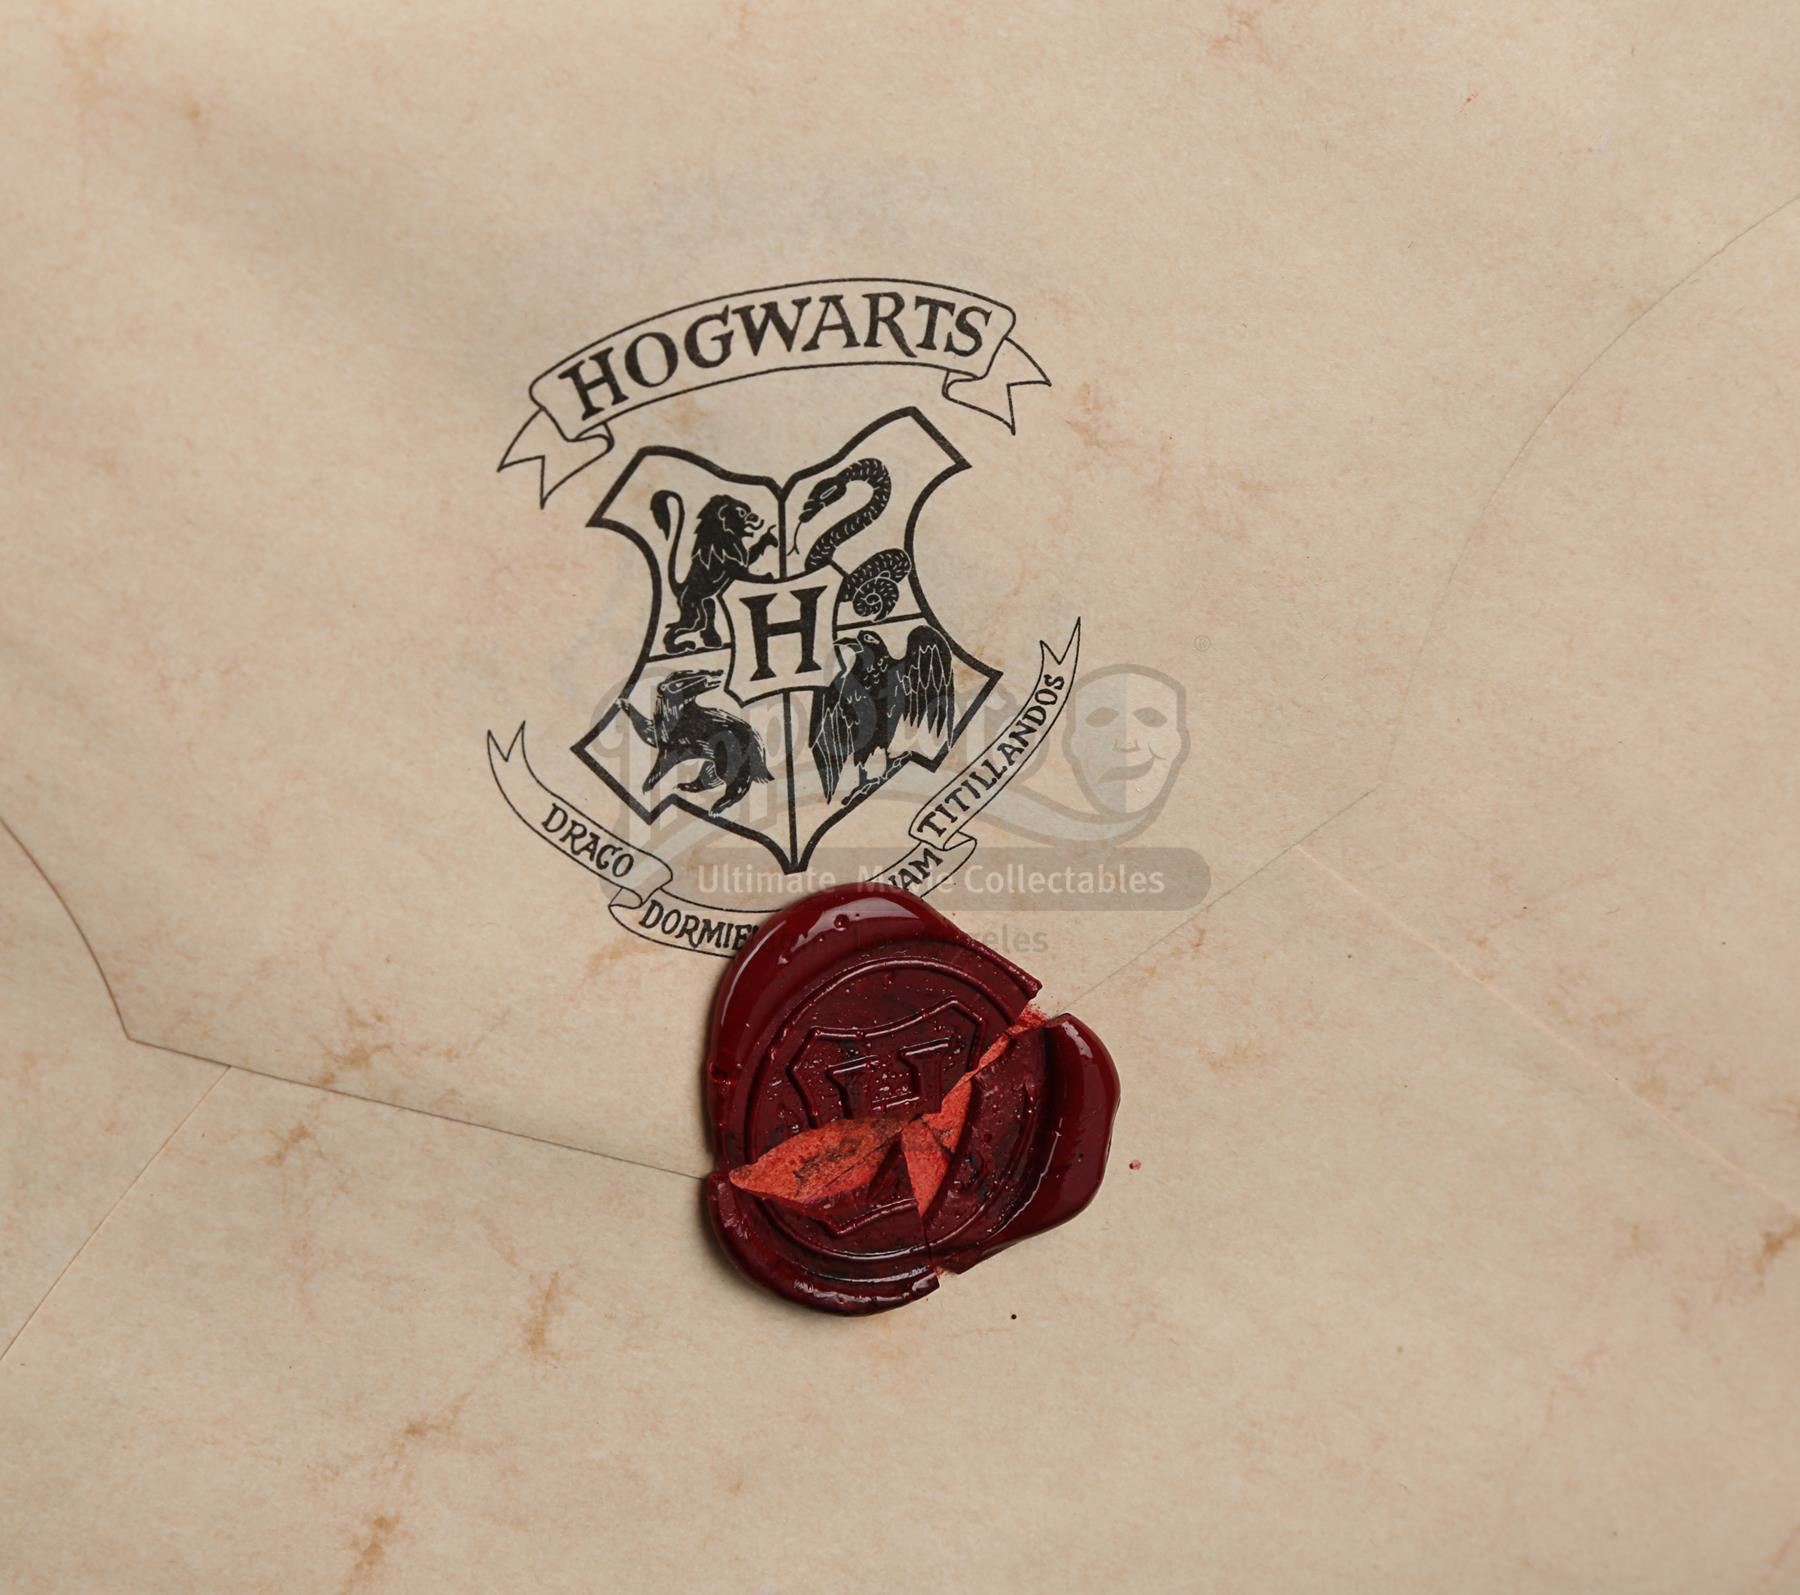 Hogwarts Seal and Wax Set - Boutique Harry Potter